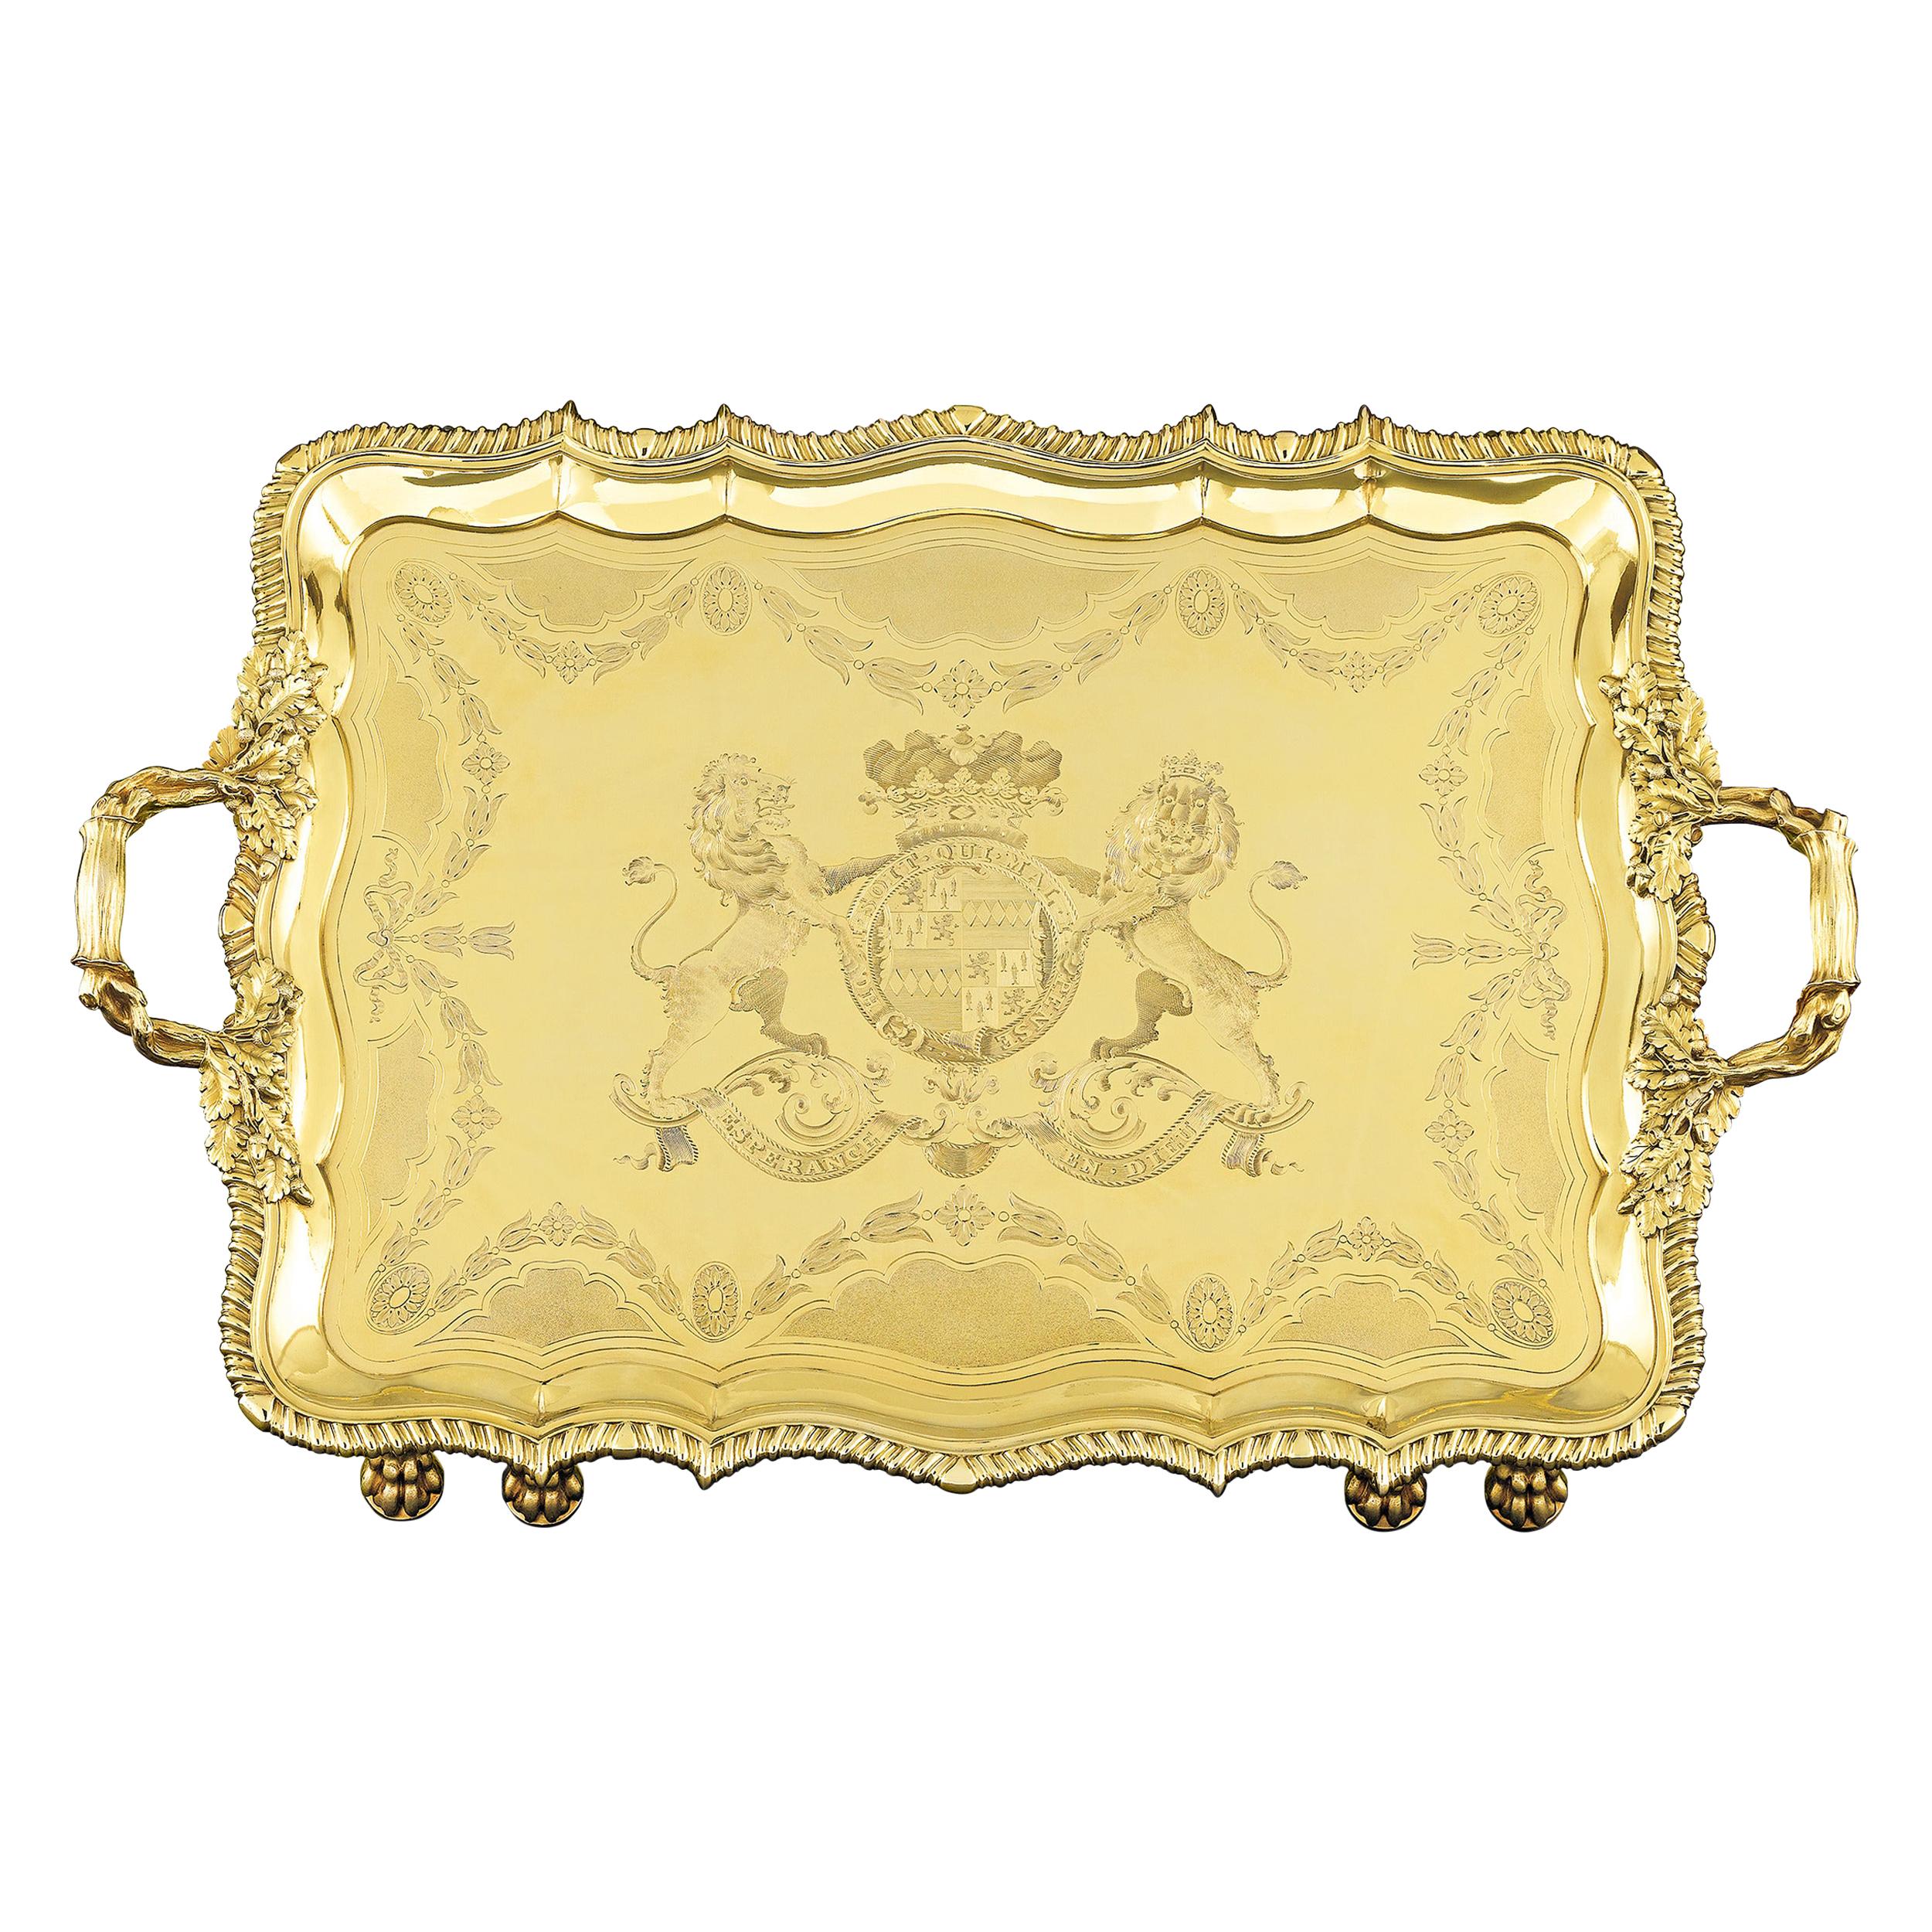 Regency Silver Gilt Tray by Rundell and Jackson